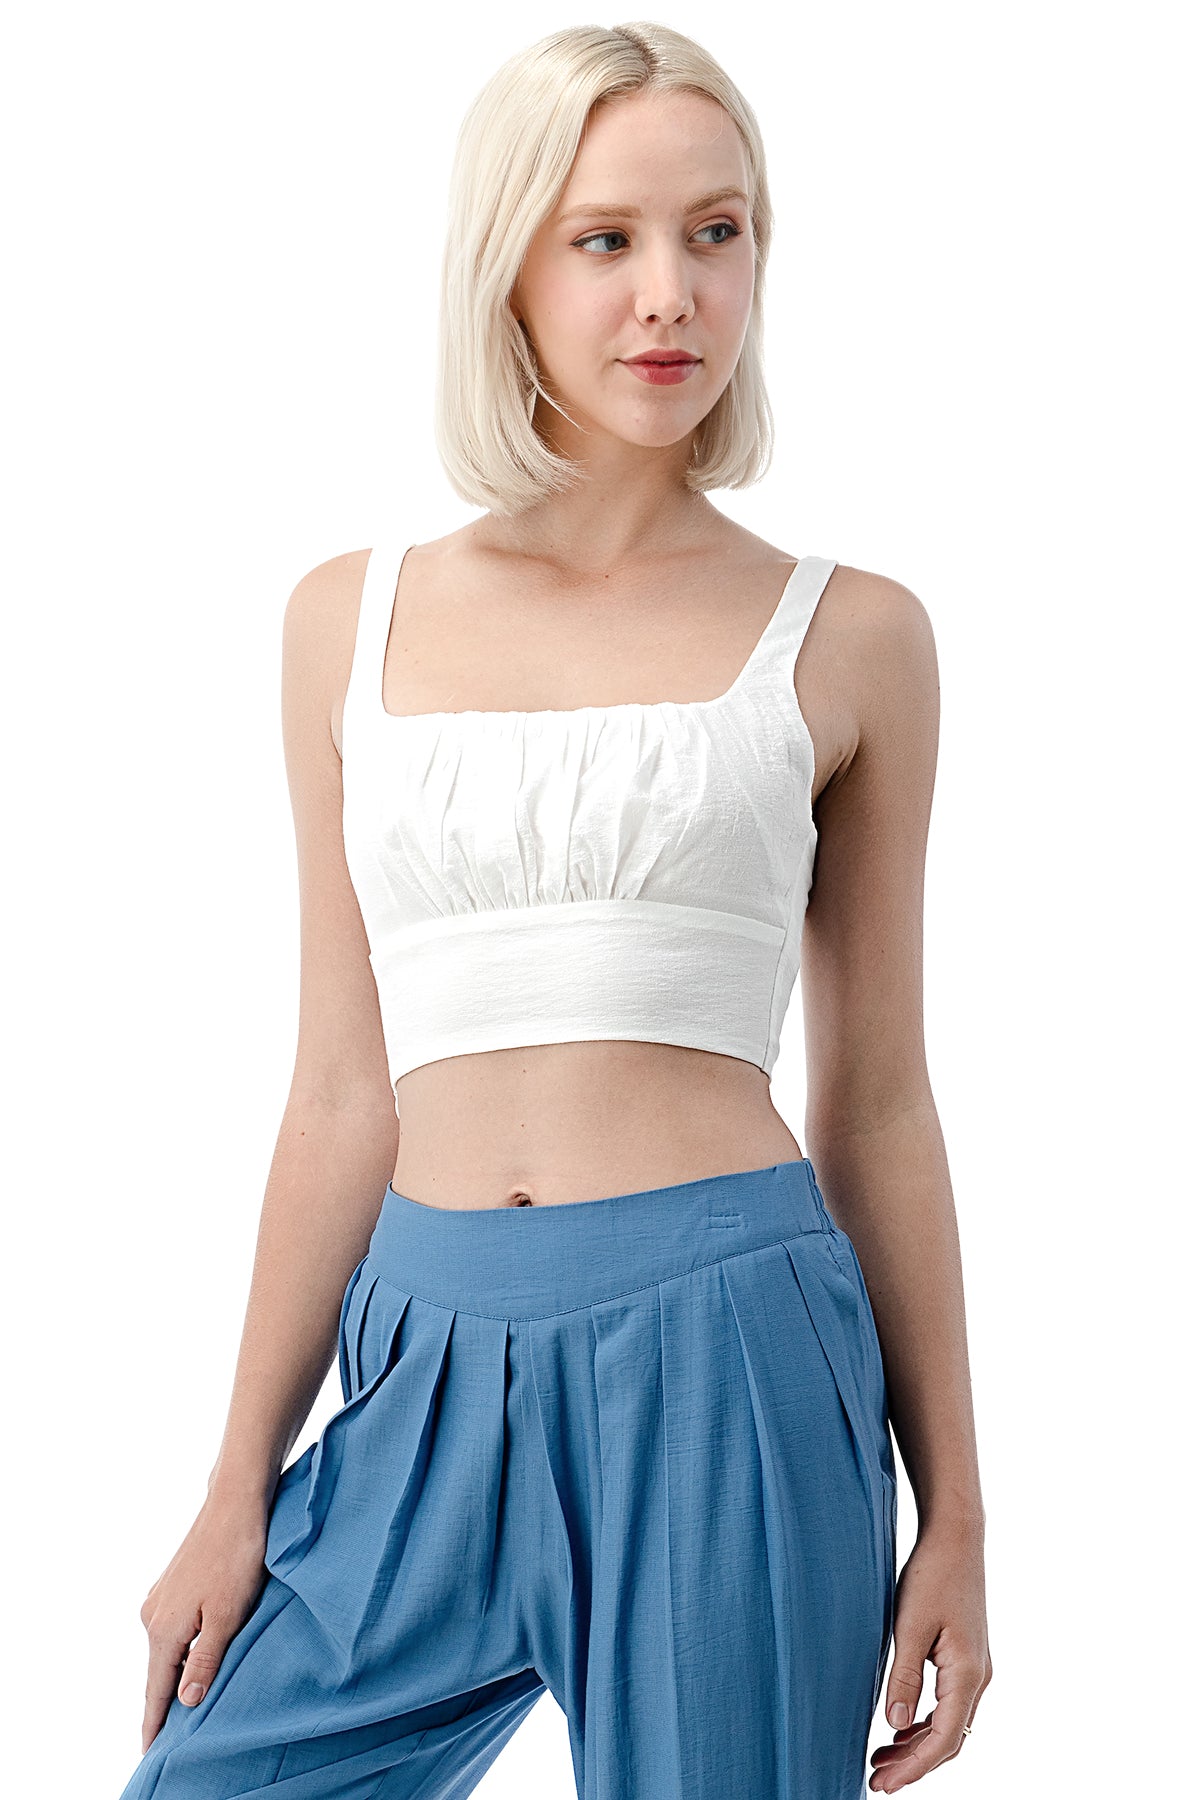 EDGY Land Girl's and Women's Pleated Front and Smocked Back Casual Tank Top